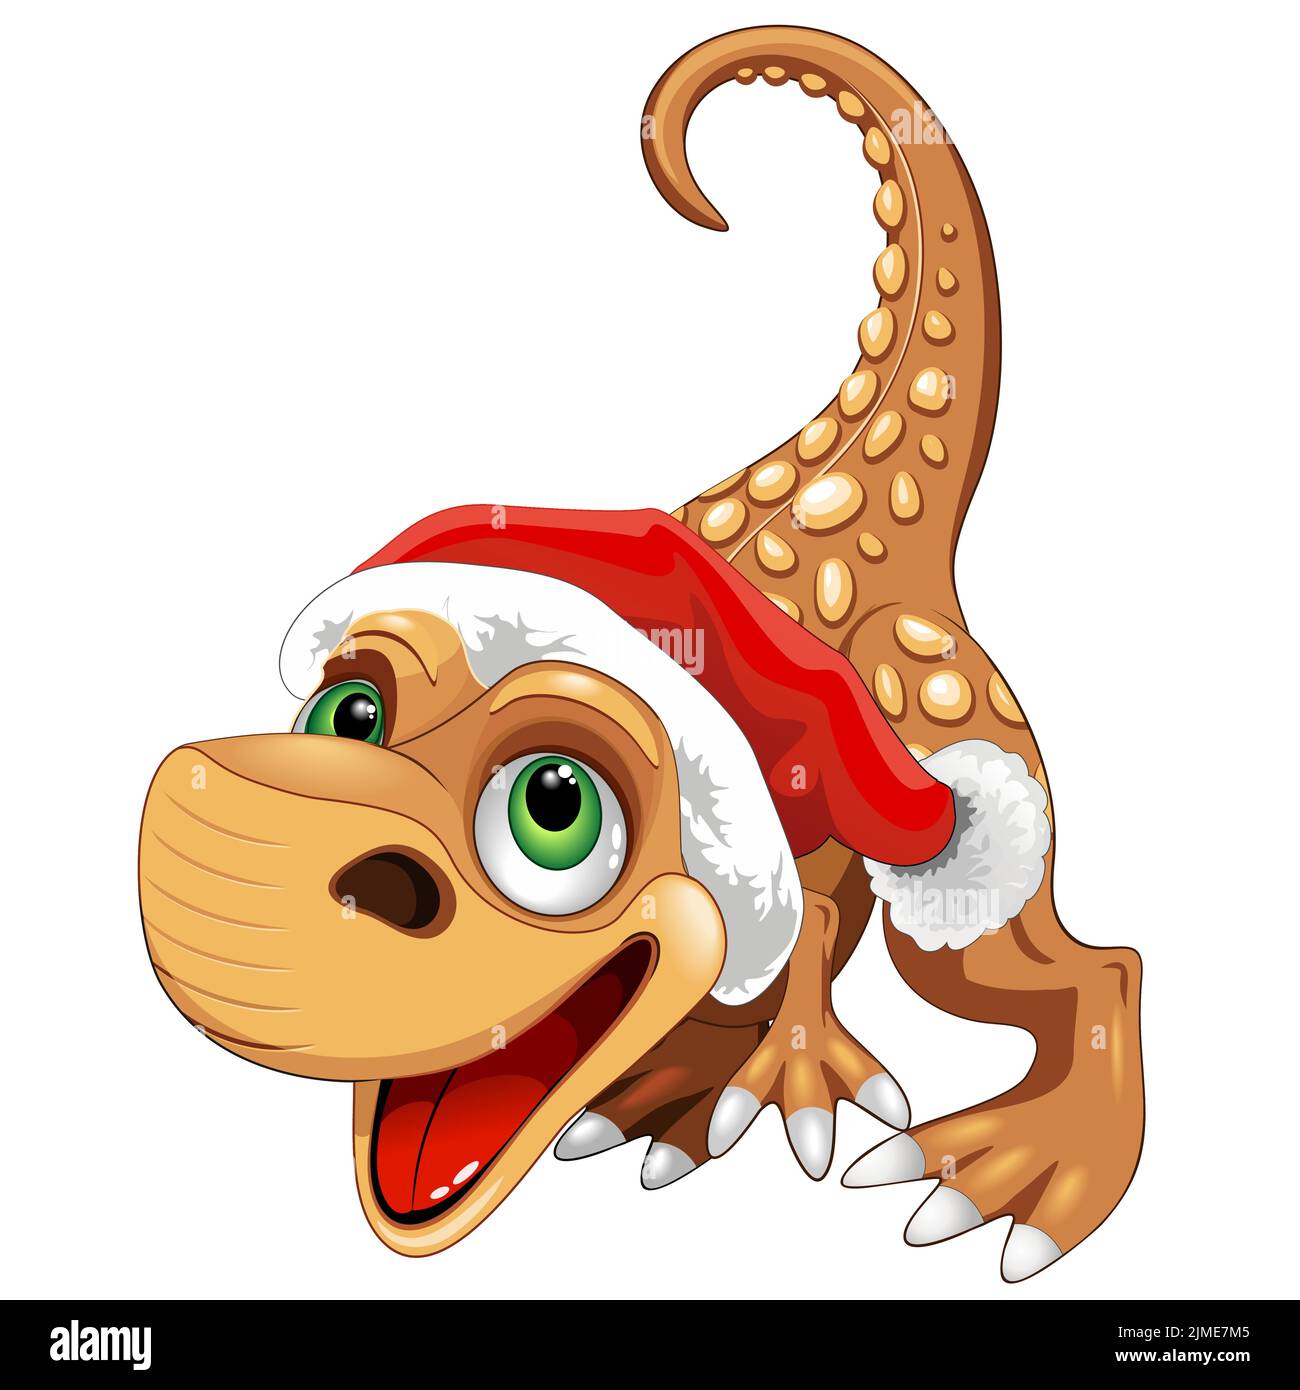 A vertical vector illustration of a baby dinosaur with Santa's hat, a cartoon character. Stock Vector